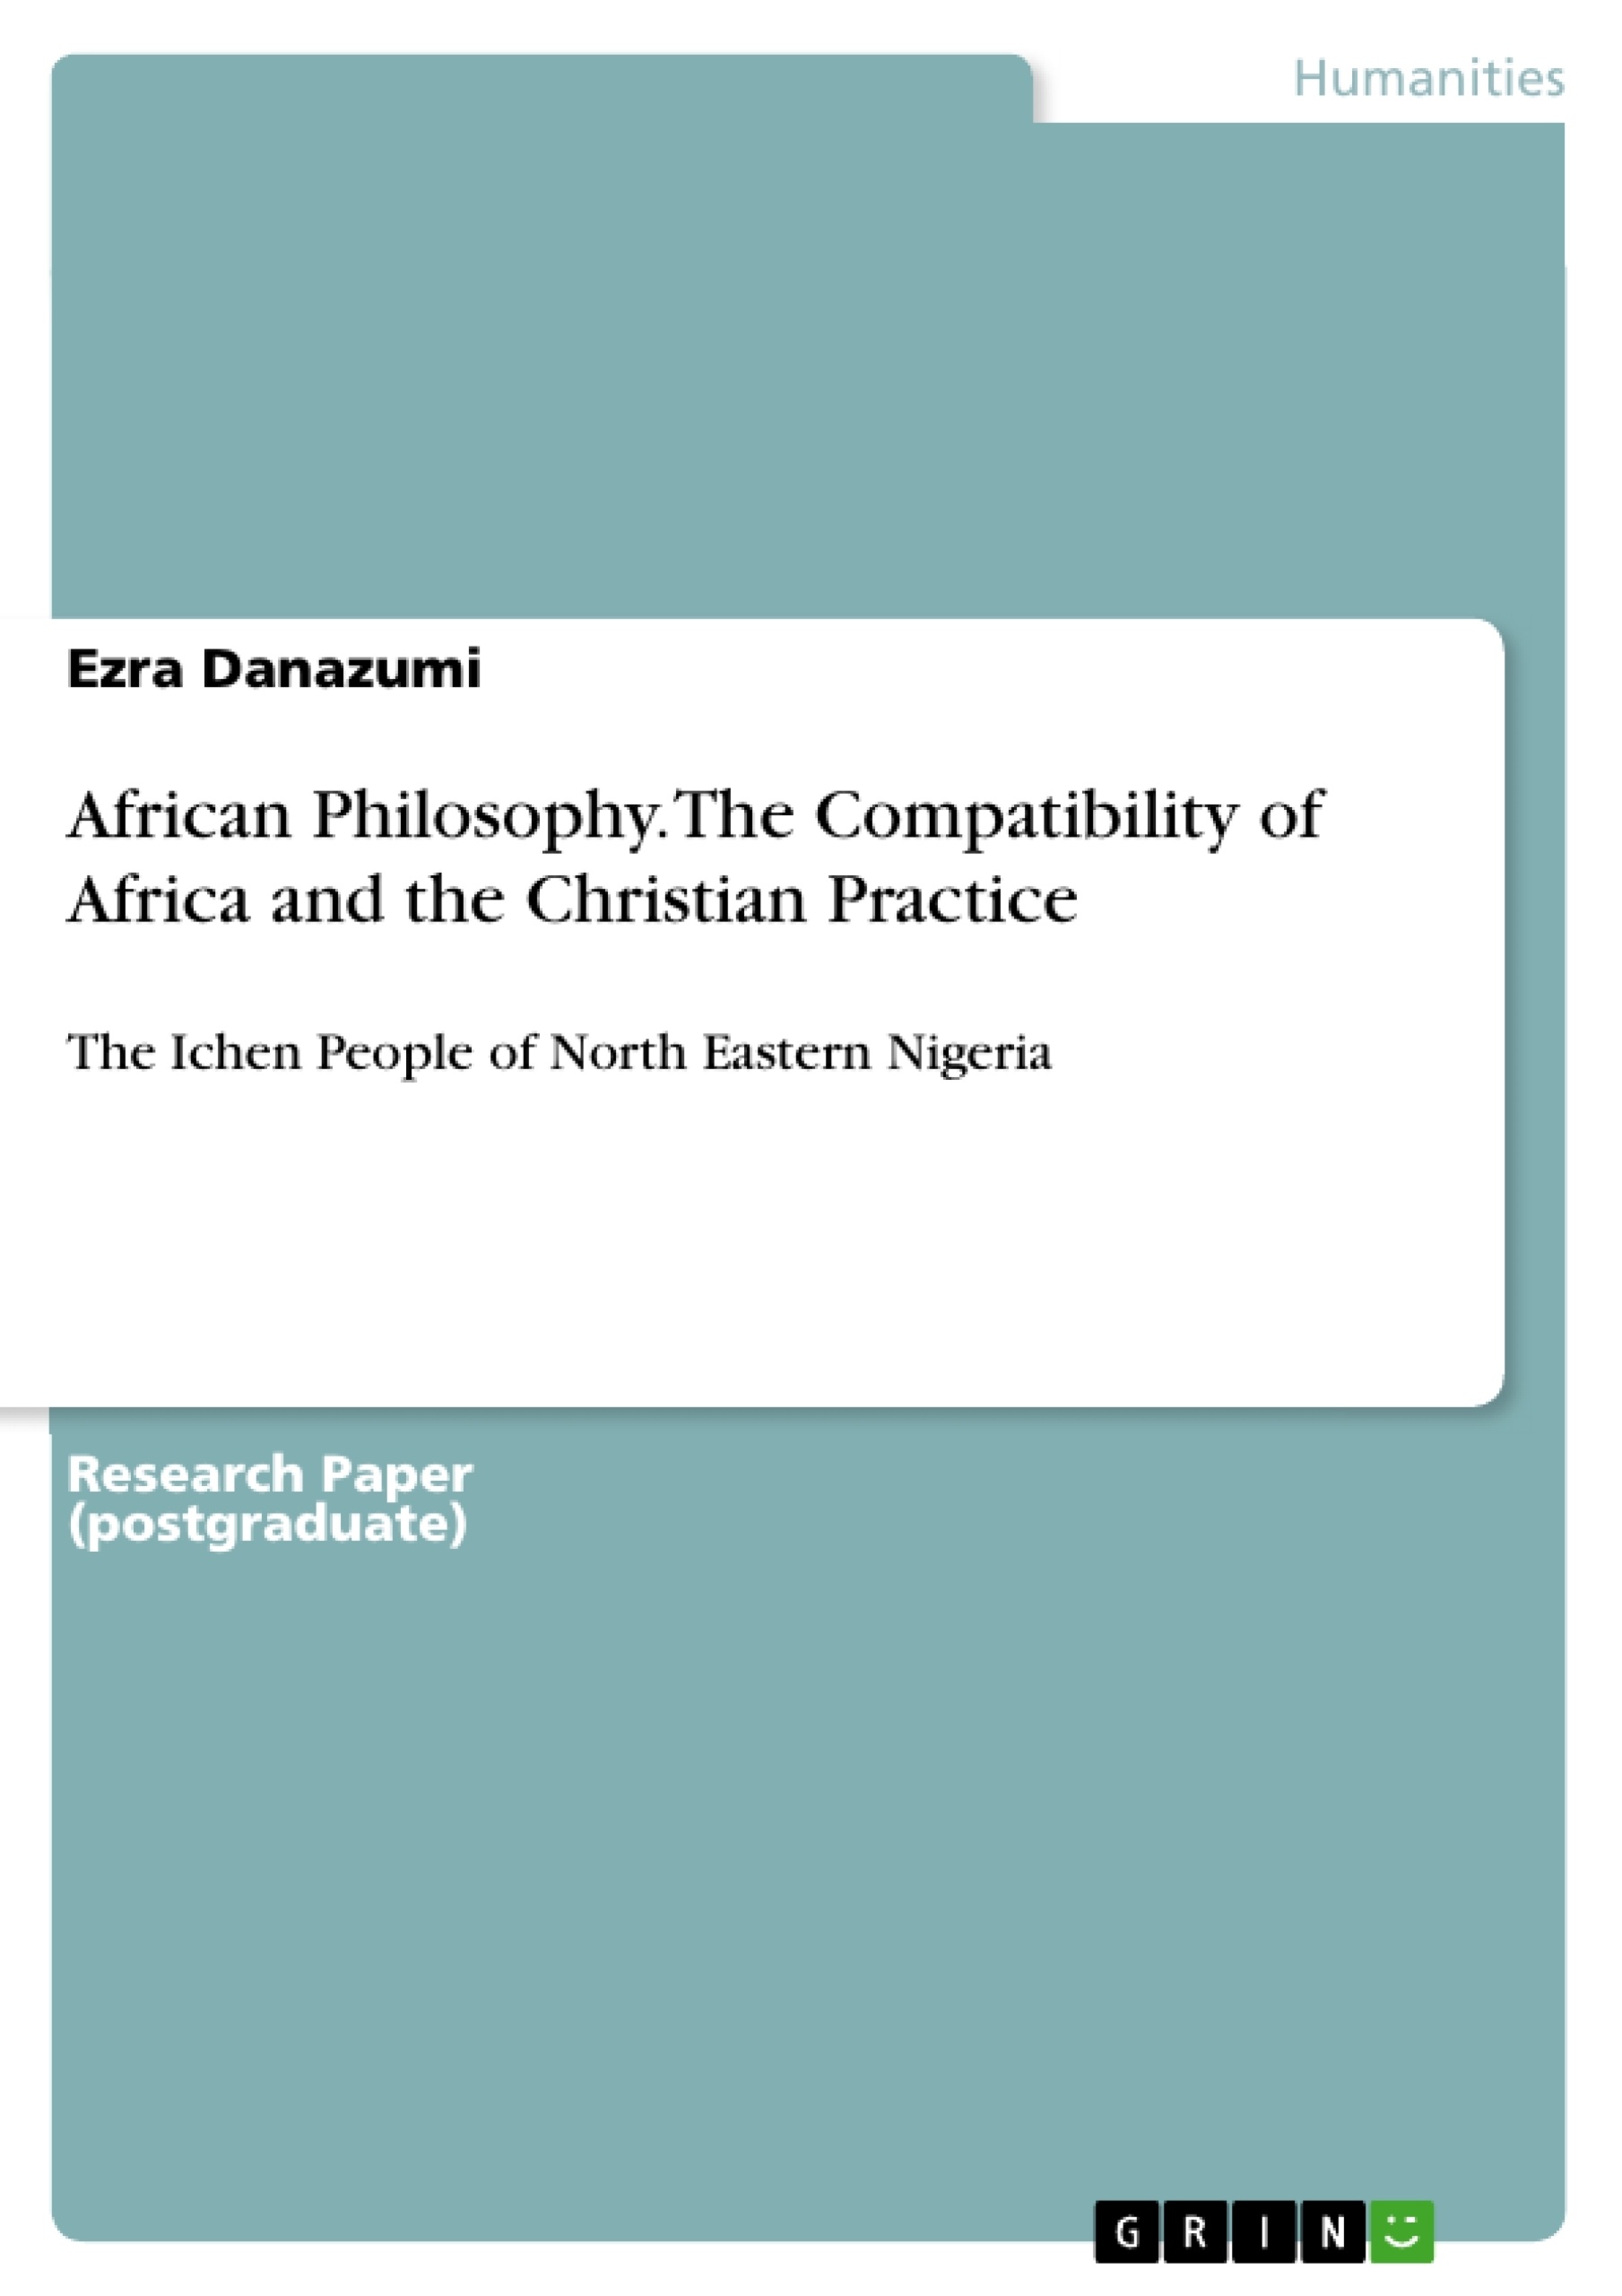 Titel: African Philosophy. The Compatibility of Africa and the Christian Practice